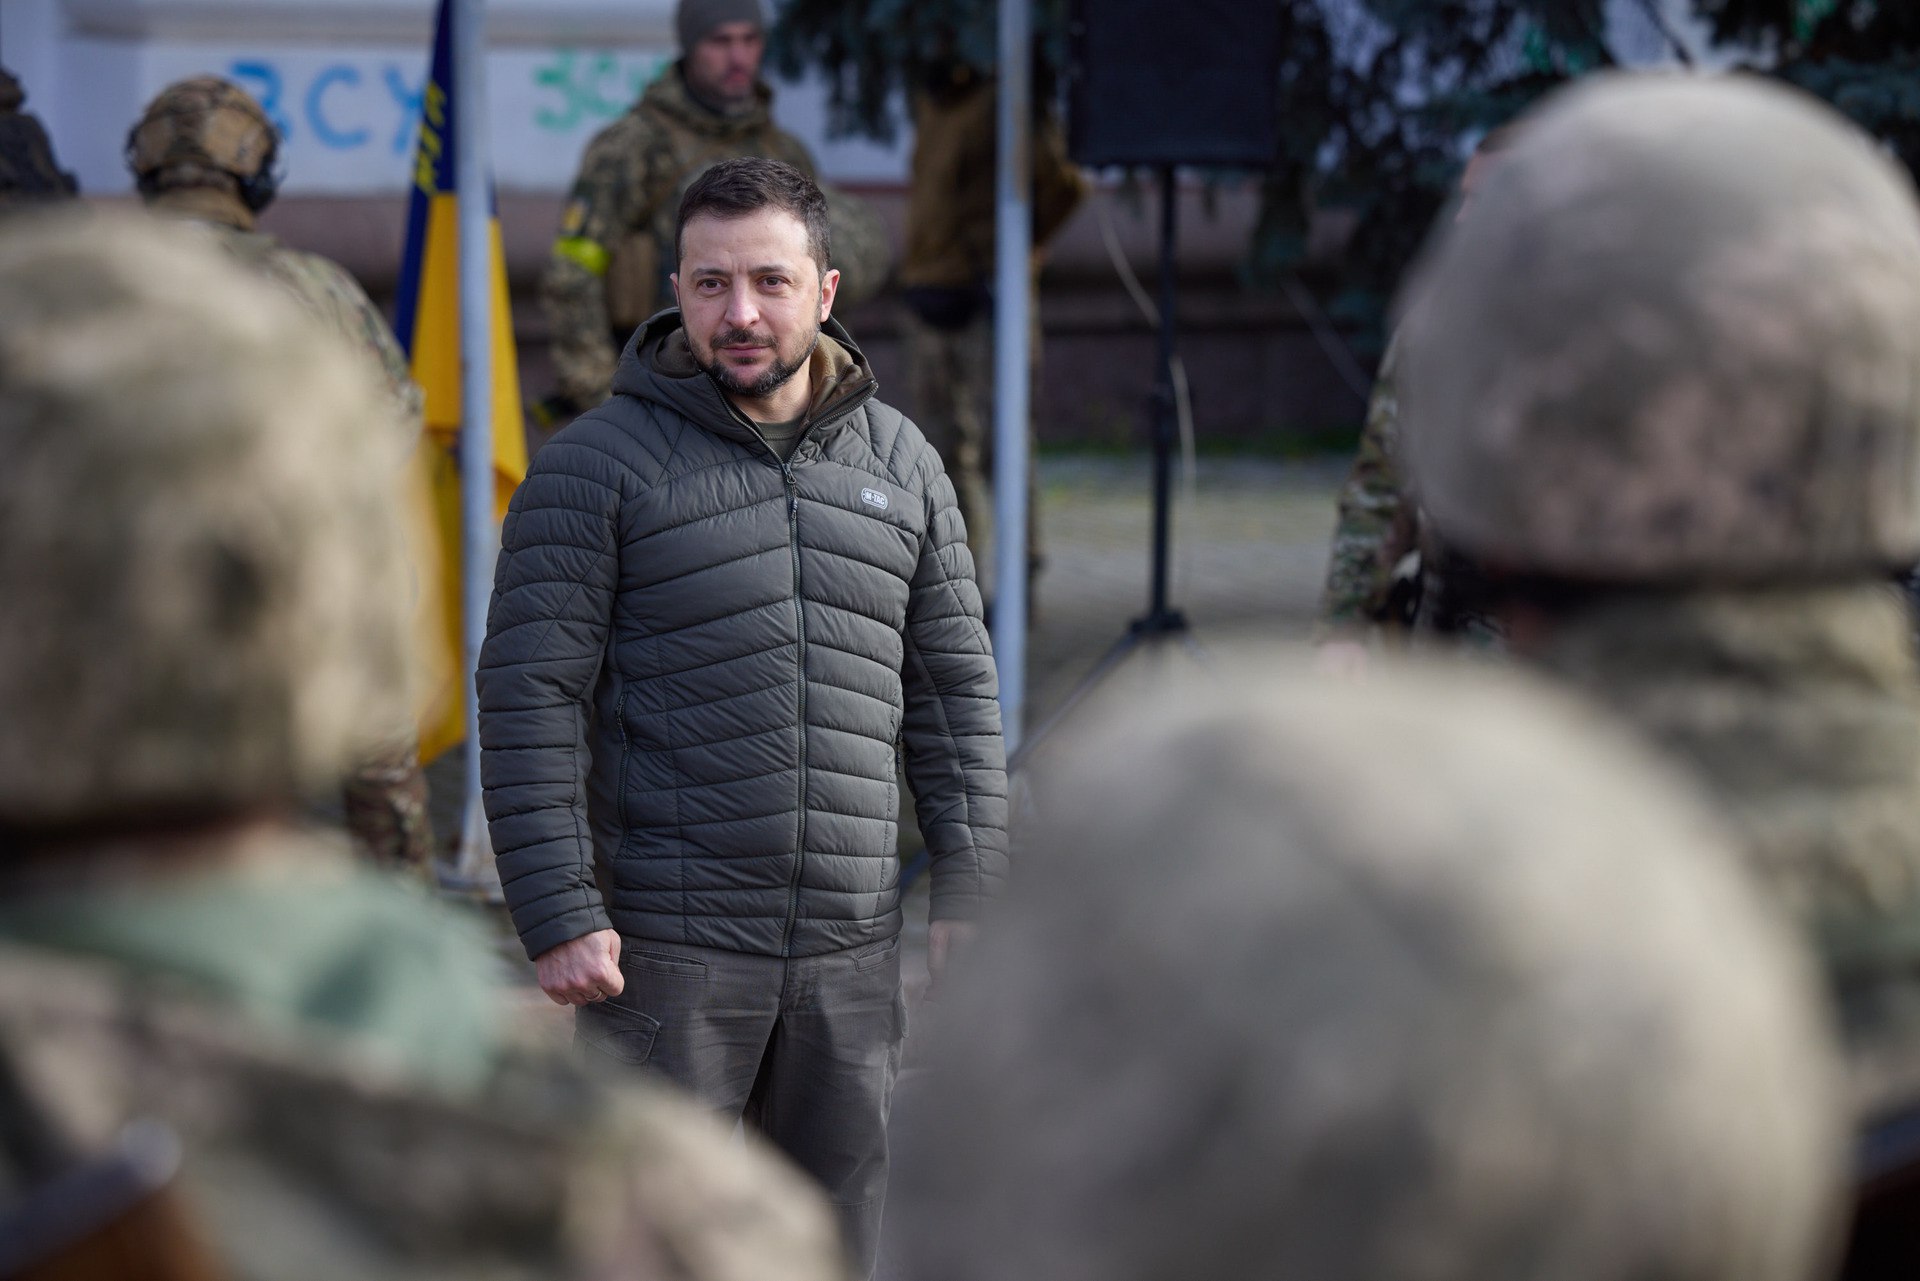 Why Ukraine chooses to negotiate on the battlefield, not at peace talks